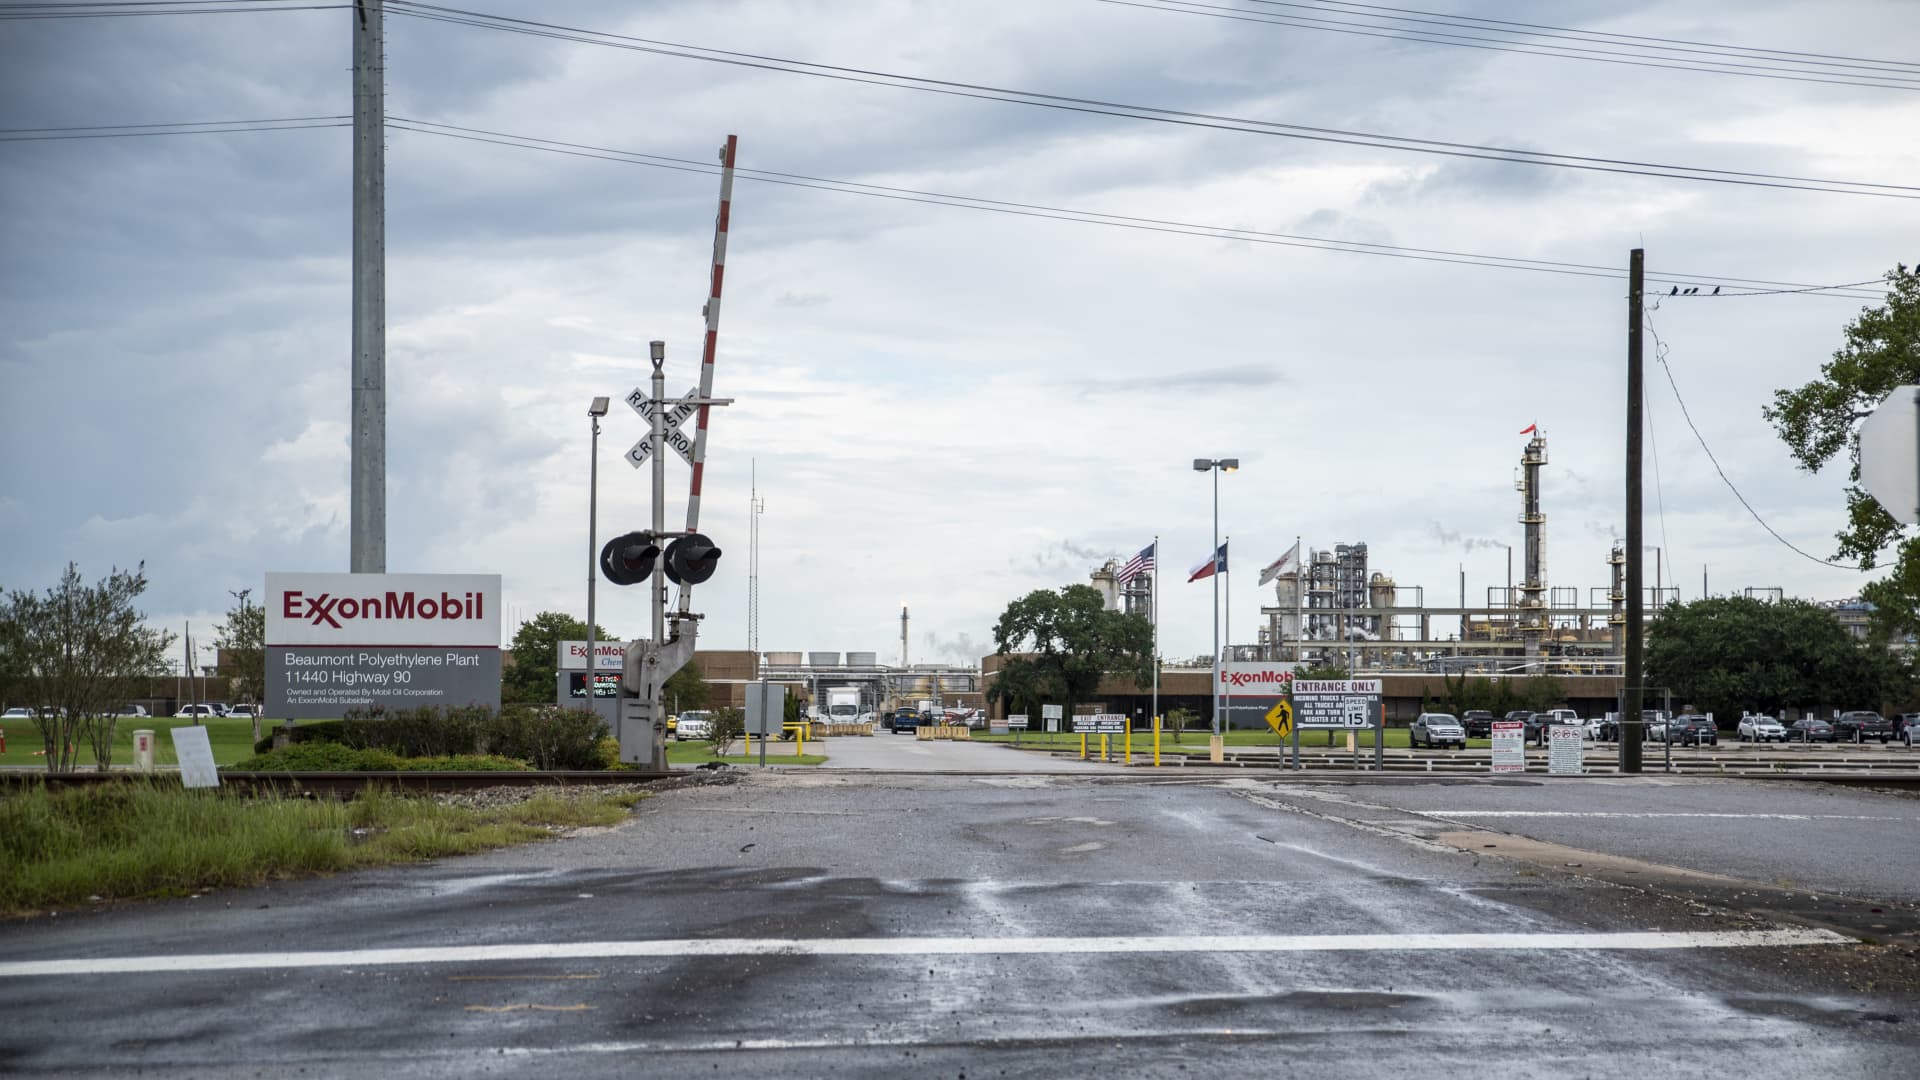 The Exxon Mobil Beaumont Polyethylene Plant stands following Tropical Storm Imelda in Beaumont, Texas, U.S., on Friday, Sept. 20, 2019, which brought flooding that threatened refinery operations.